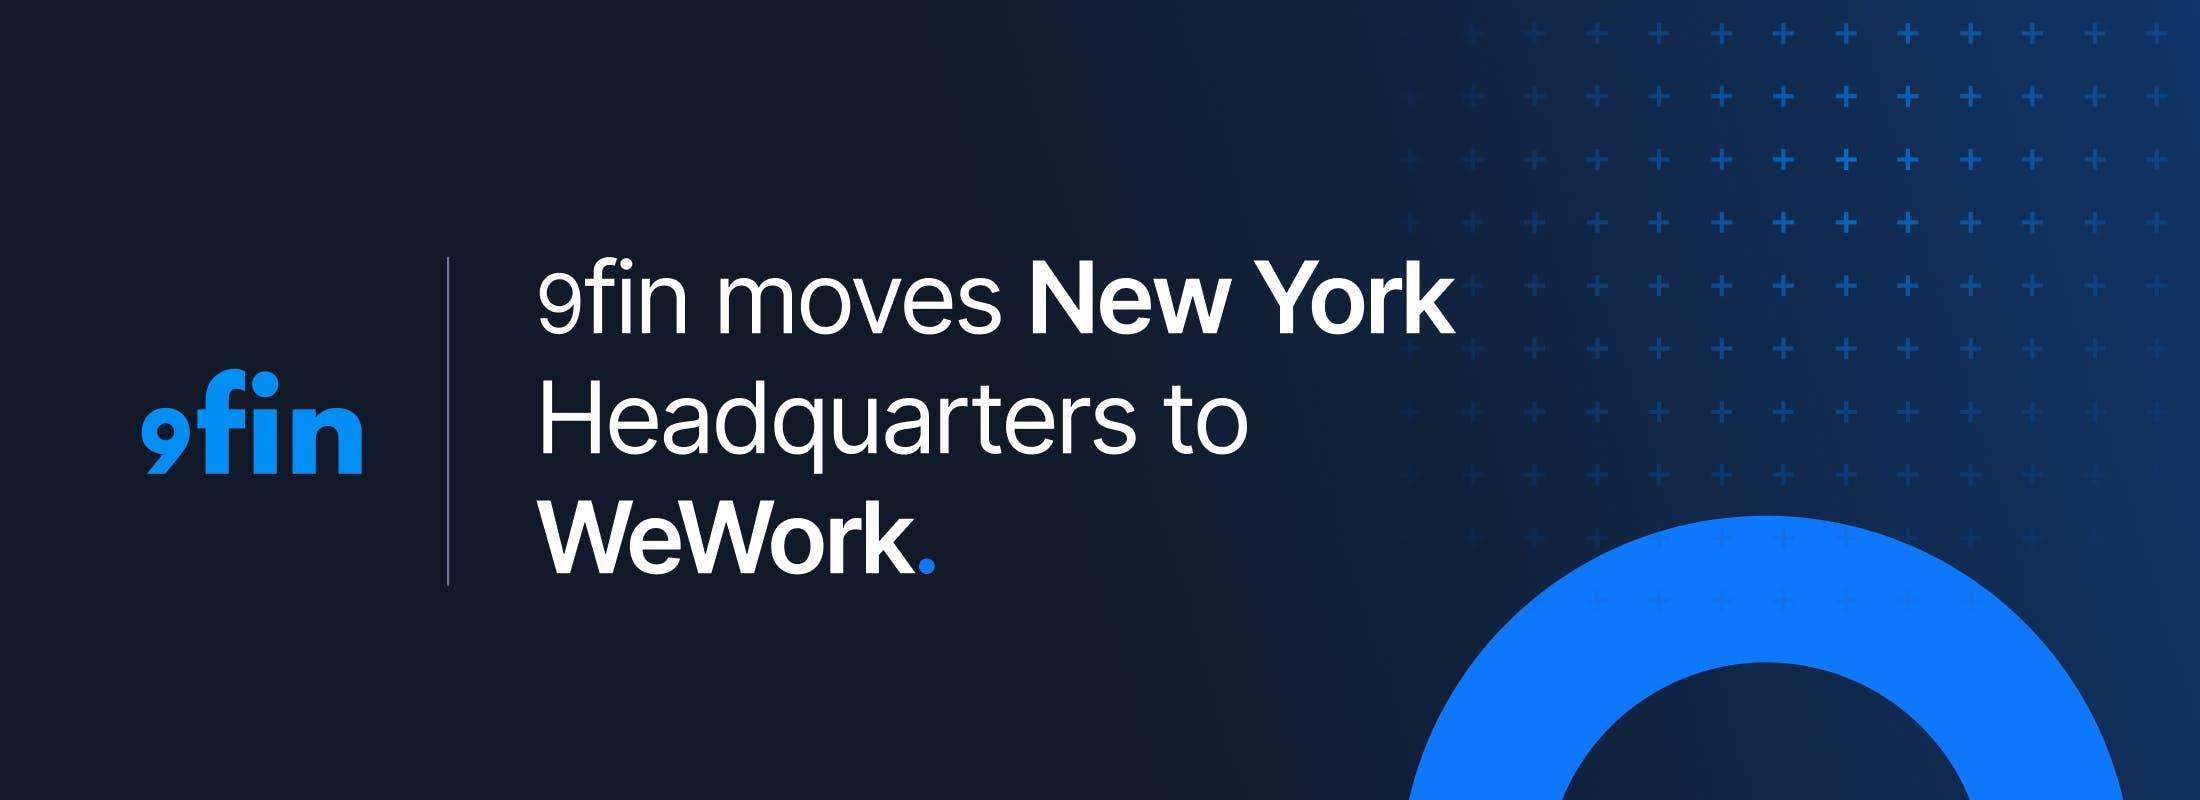 9fin moves New York Headquarters to WeWork